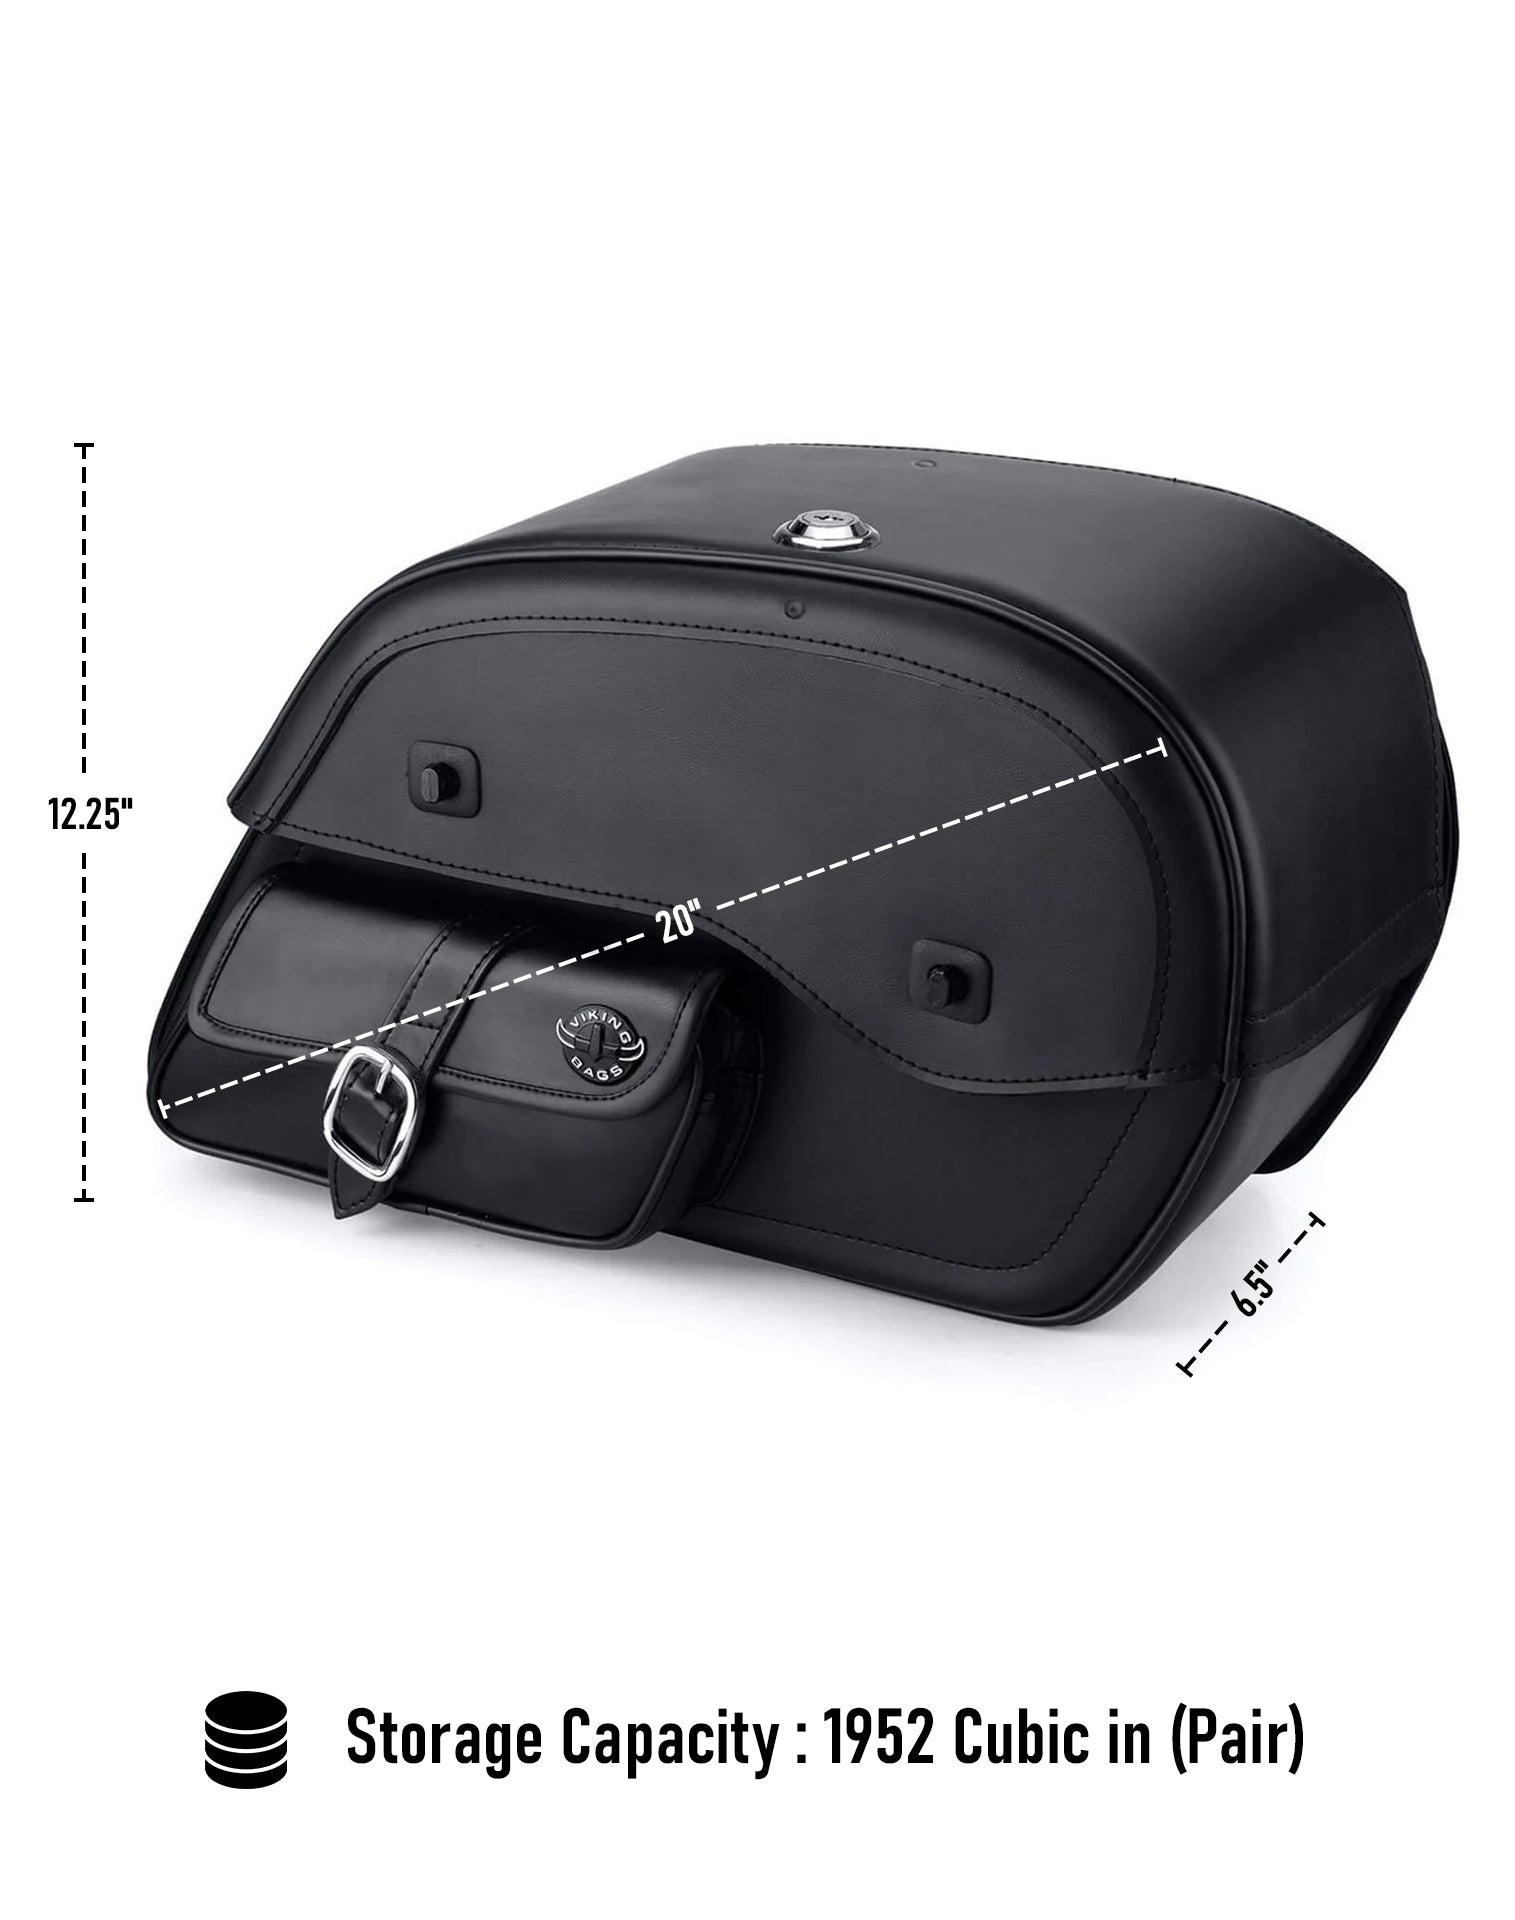 Viking Essential Side Pocket Large Leather Motorcycle Saddlebags For Harley Softail Low Rider S Fxlrs Can Store Your Ridings Gears